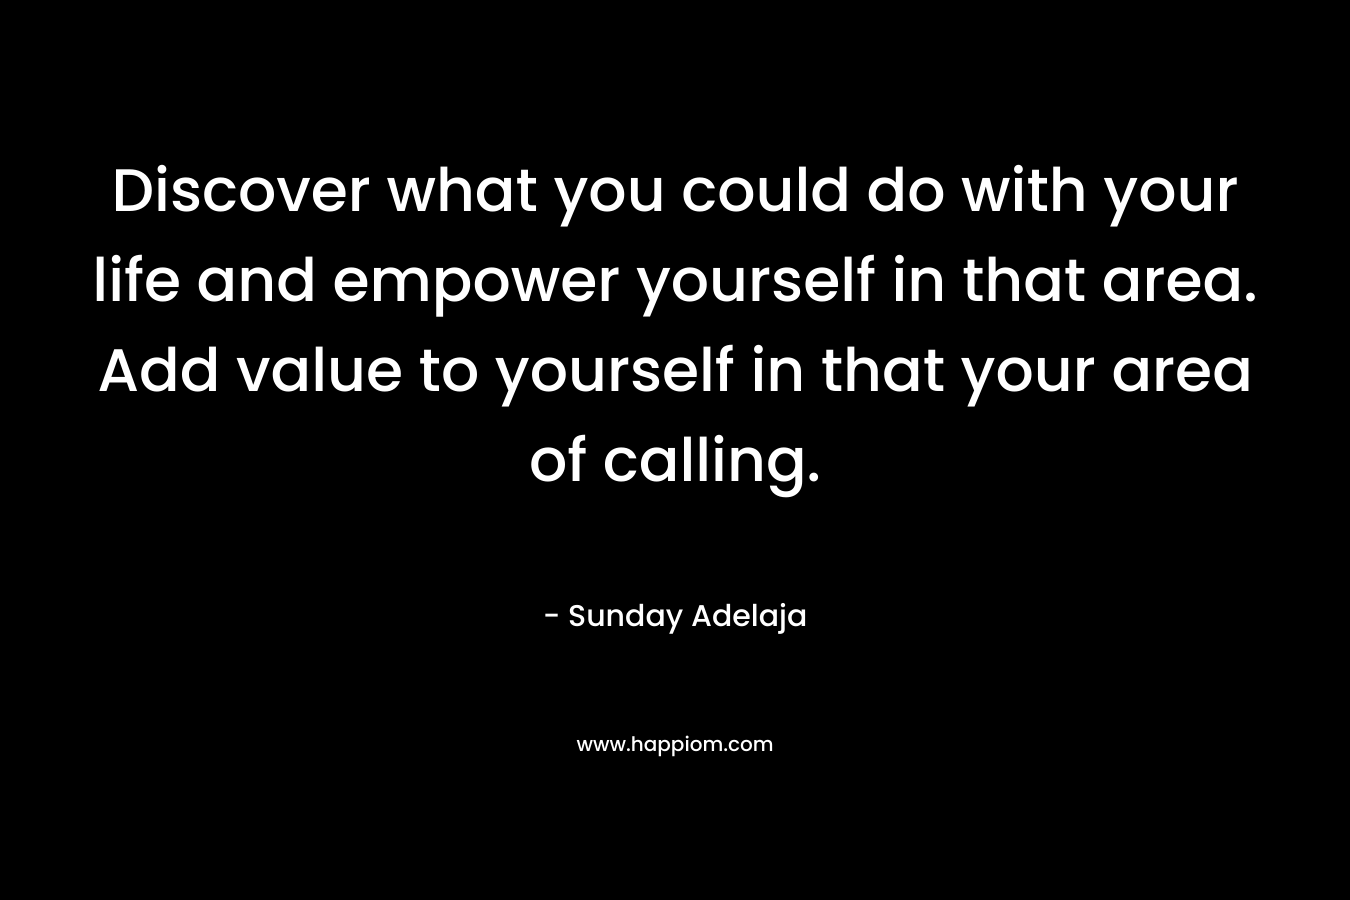 Discover what you could do with your life and empower yourself in that area. Add value to yourself in that your area of calling.